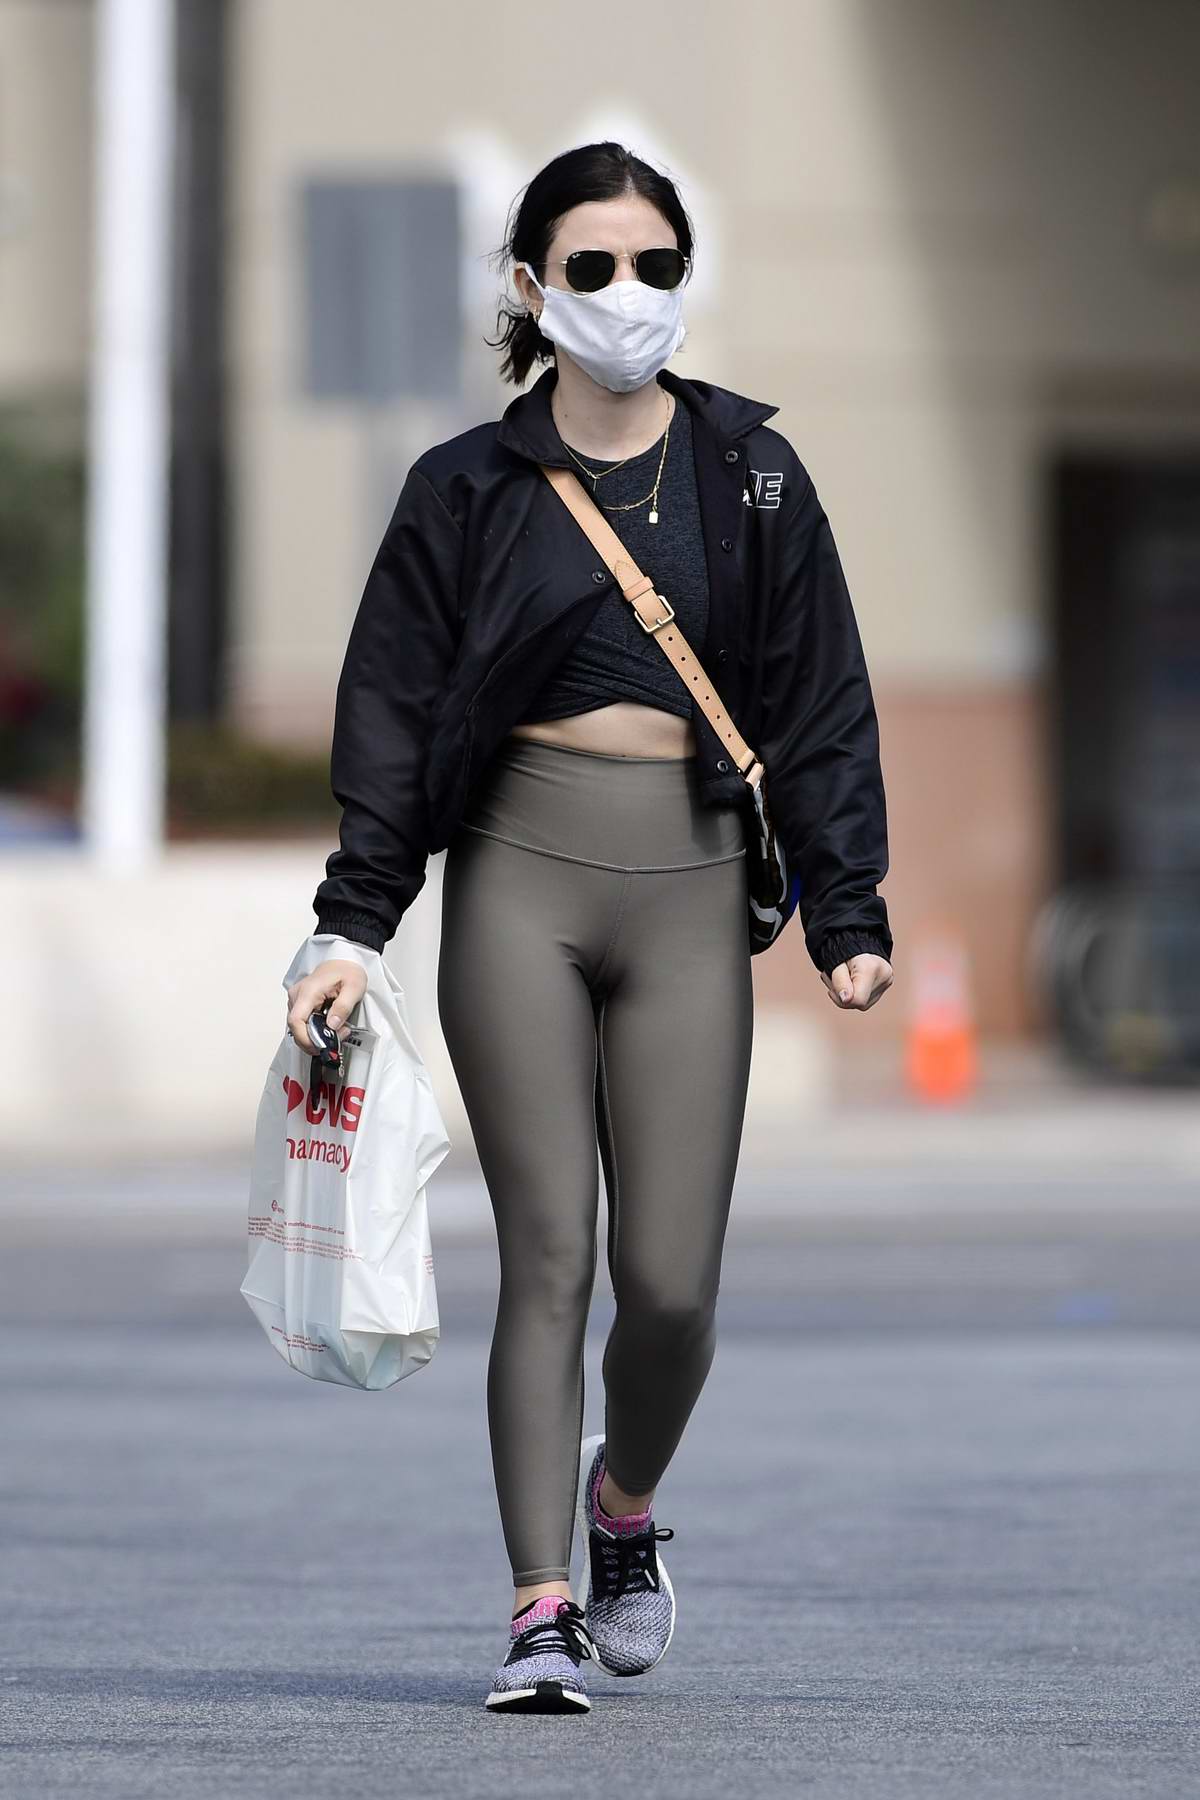 https://www.celebsfirst.com/wp-content/uploads/2020/04/lucy-hale-wears-her-mask-as-she-stops-by-a-cvs-in-los-angeles-040420_13.jpg